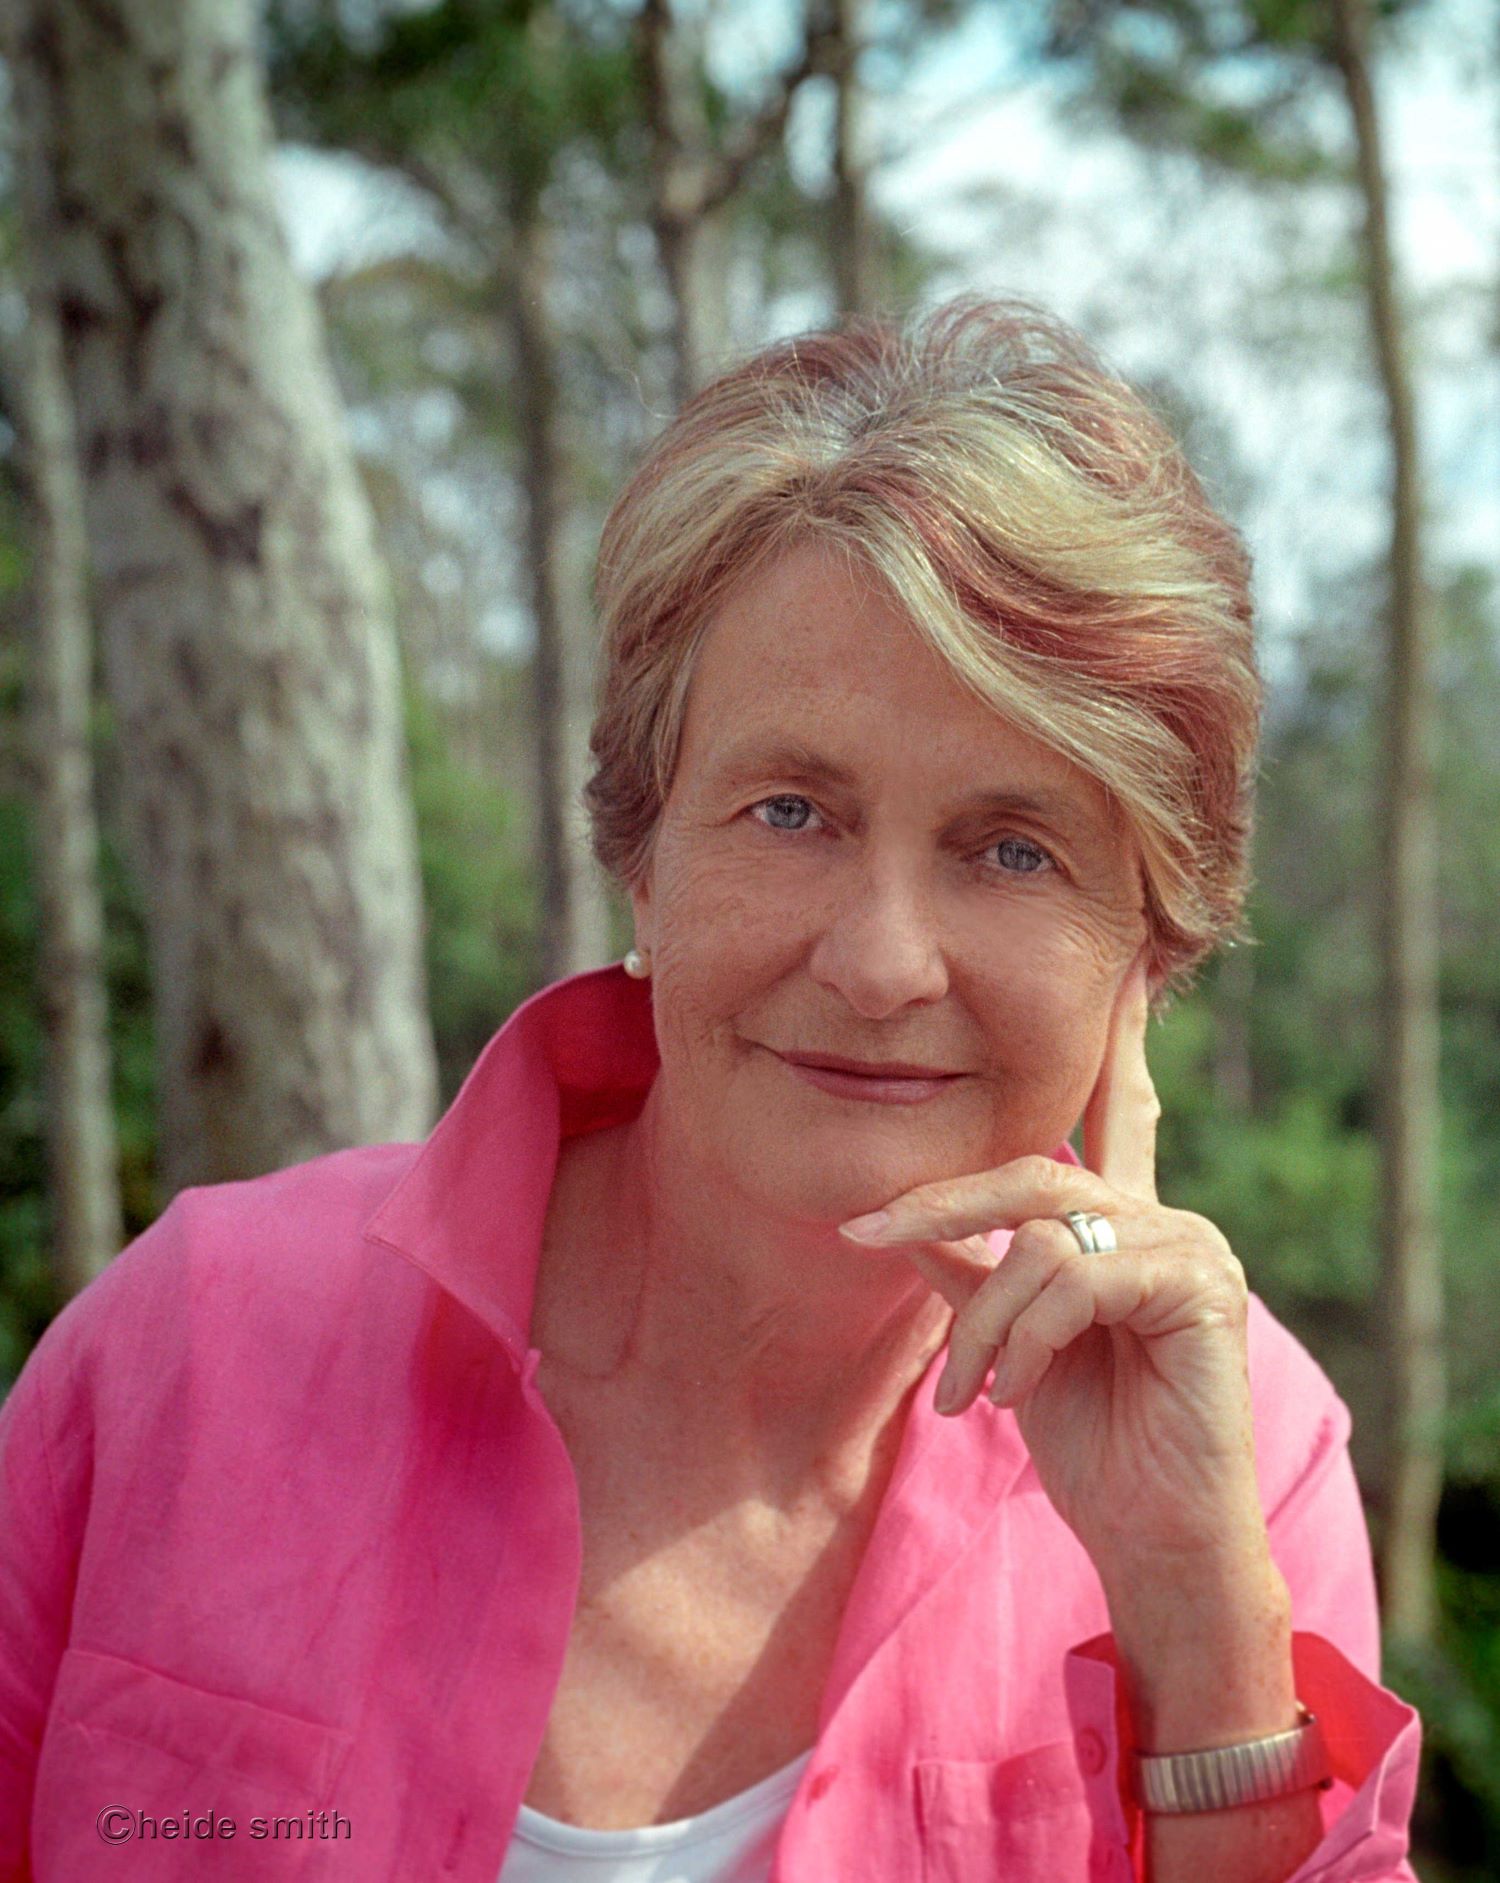 “You’re going to have to change the priorities of your life if you love this planet” With Dr. Helen Caldicott